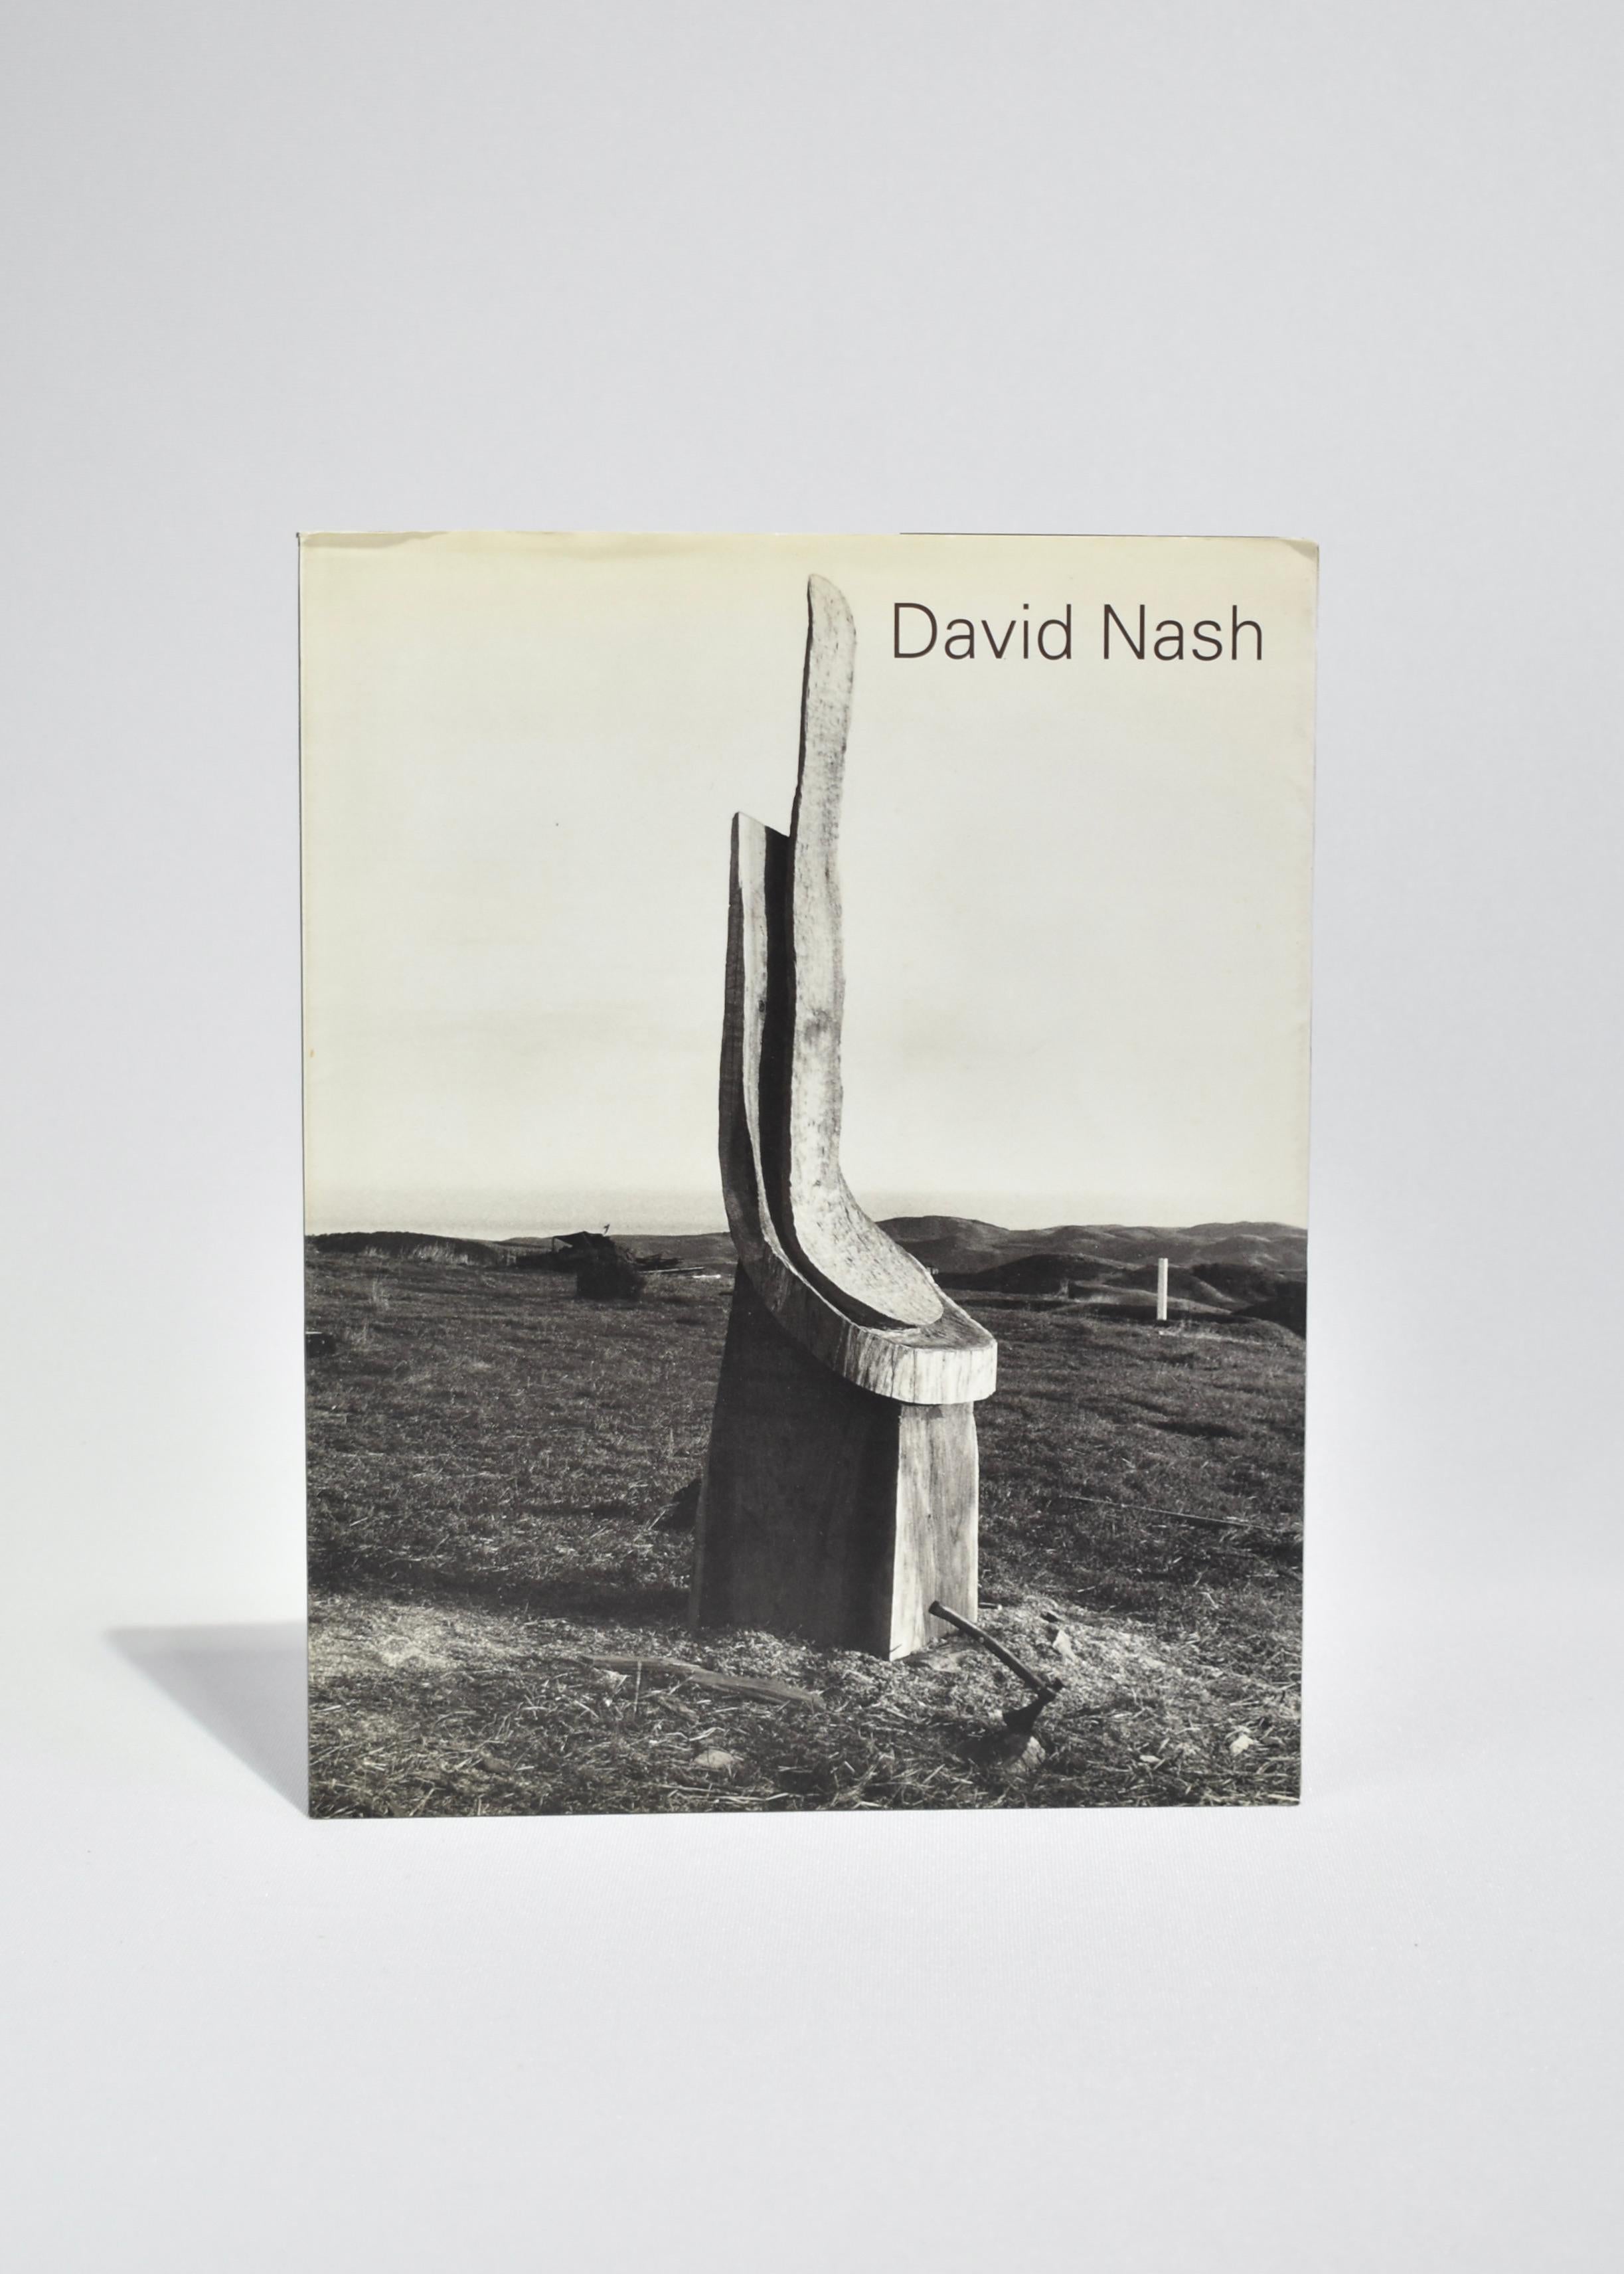 Vintage paperback coffee table book discussing the work of sculptor, David Nash, between the years of 1971-1990. By David Nash and Norbert Lynton, published in 1990. 62 pages.

